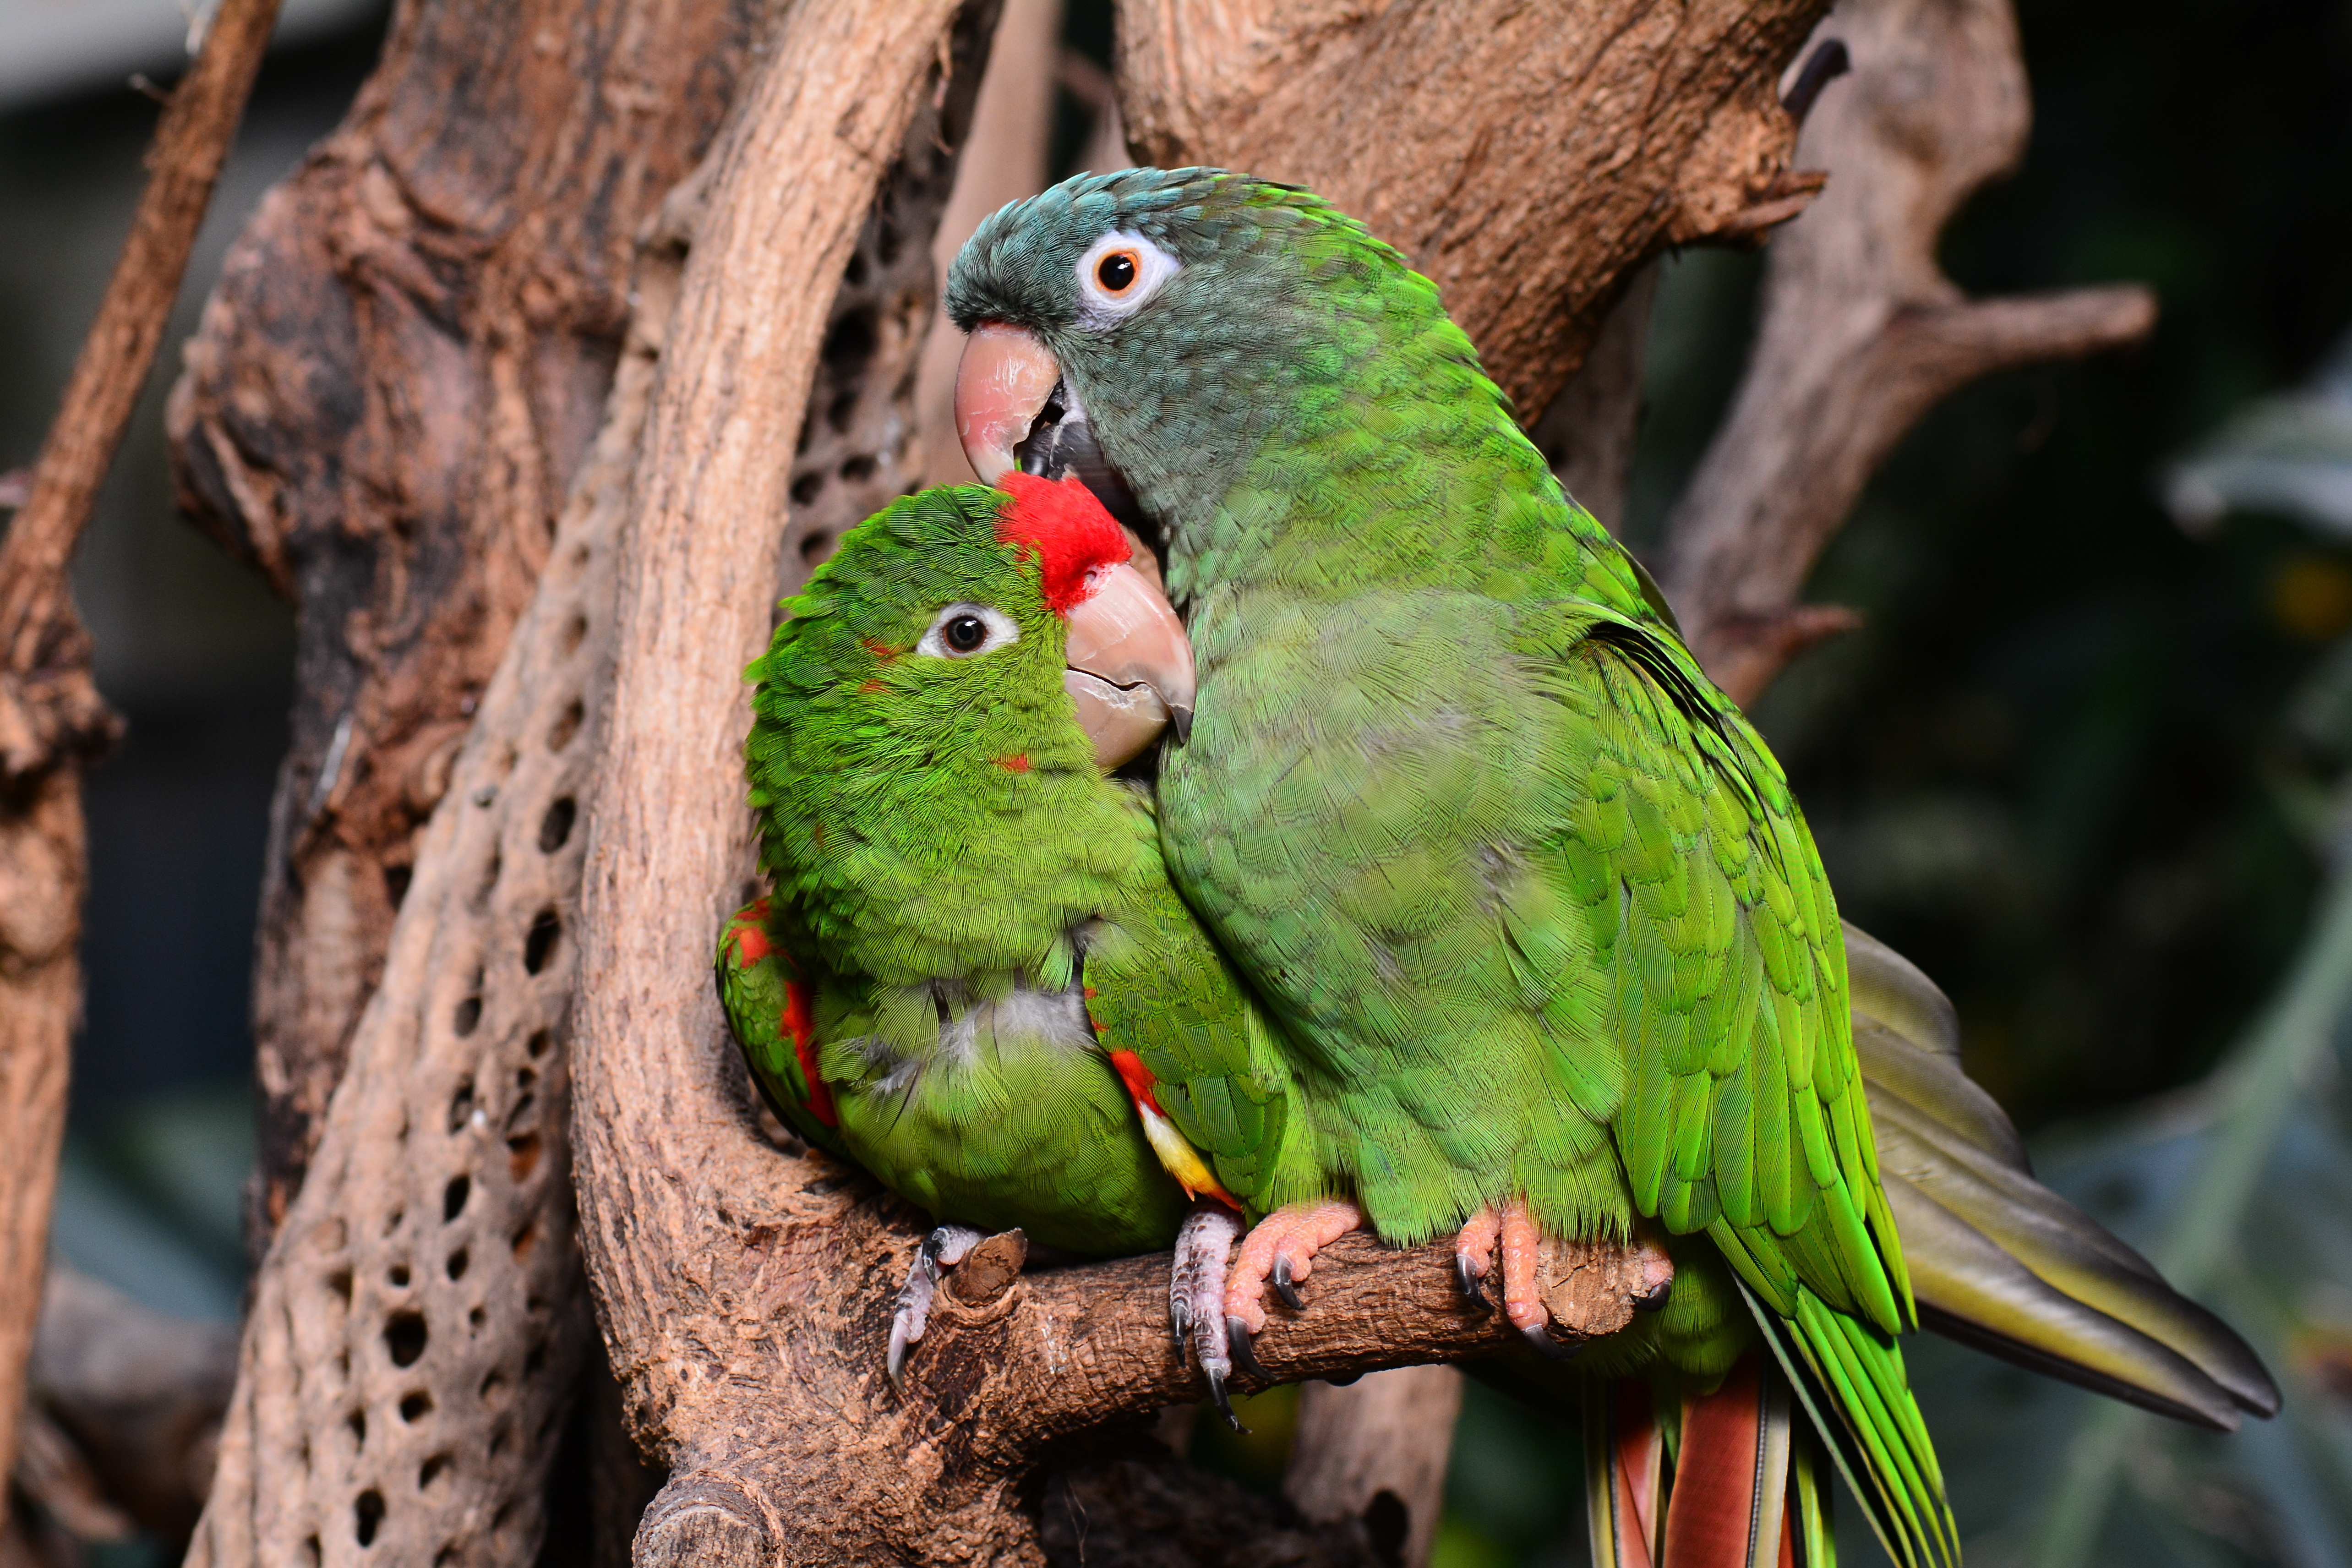 Two green parrots sitting on a branch.